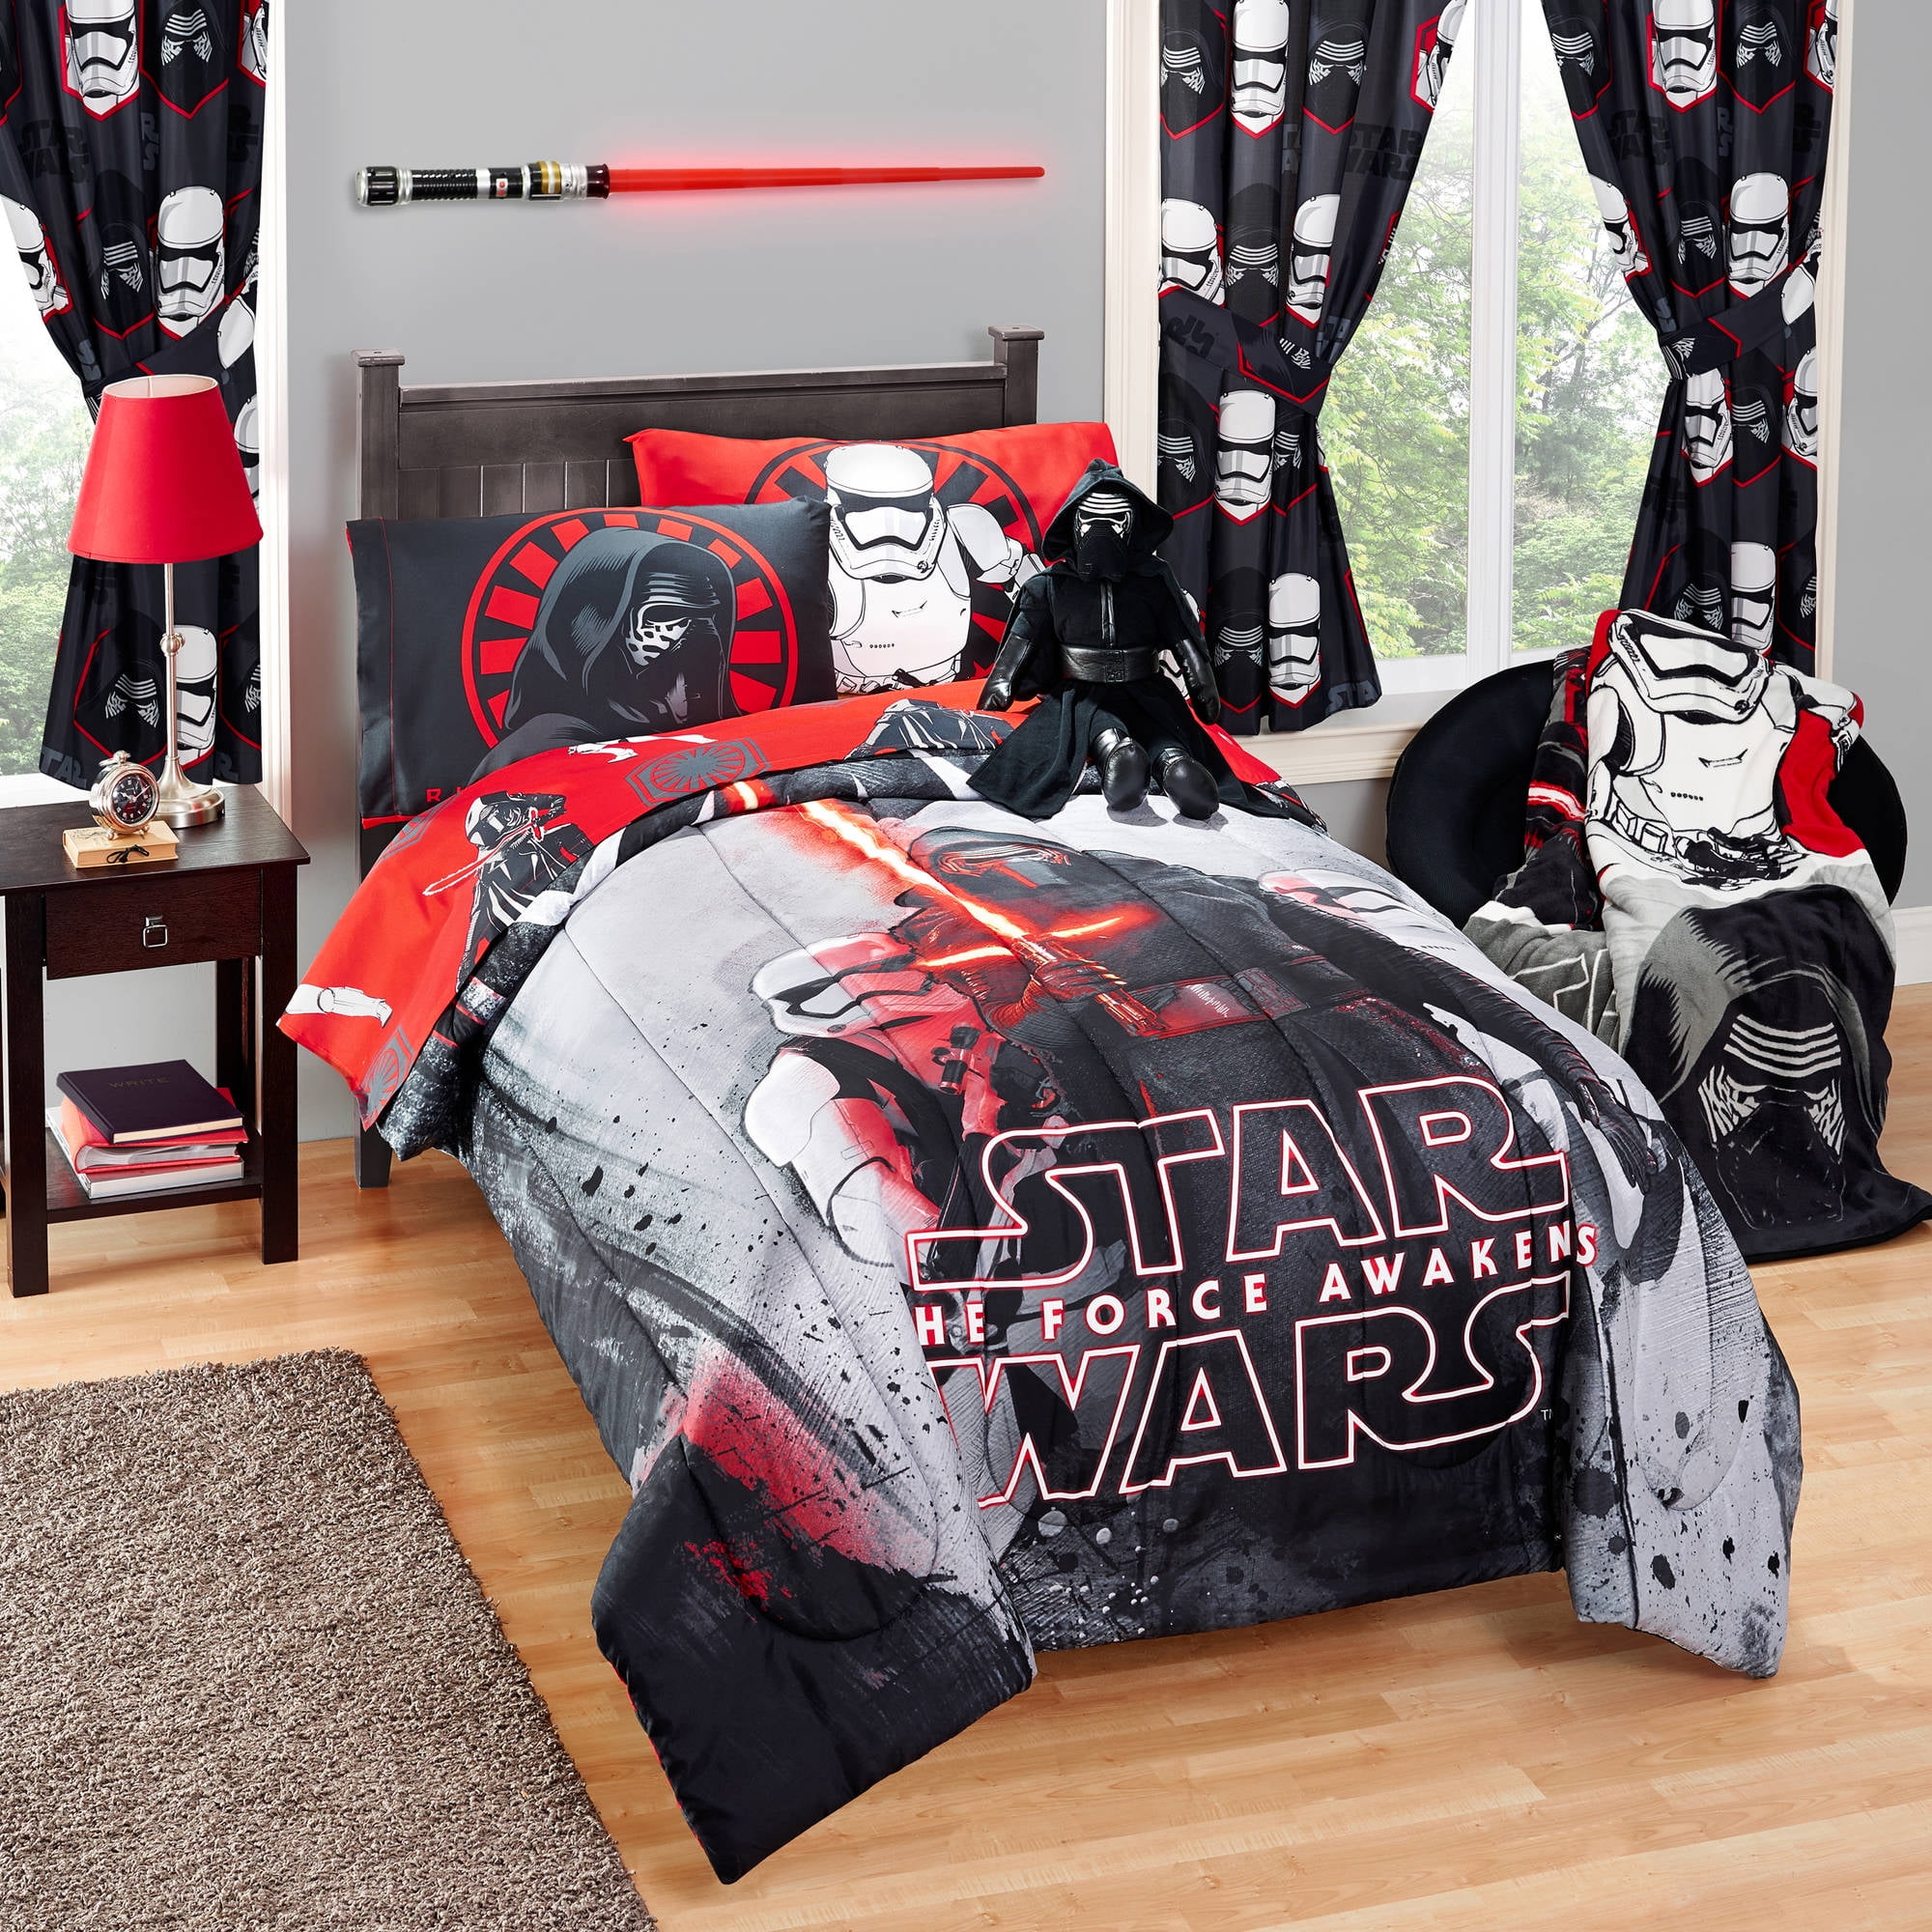 Star Wars Episode Vii Rule The Galaxy Twinfull Comforter for Excellent Star Wars Bedroom Set – the top resource